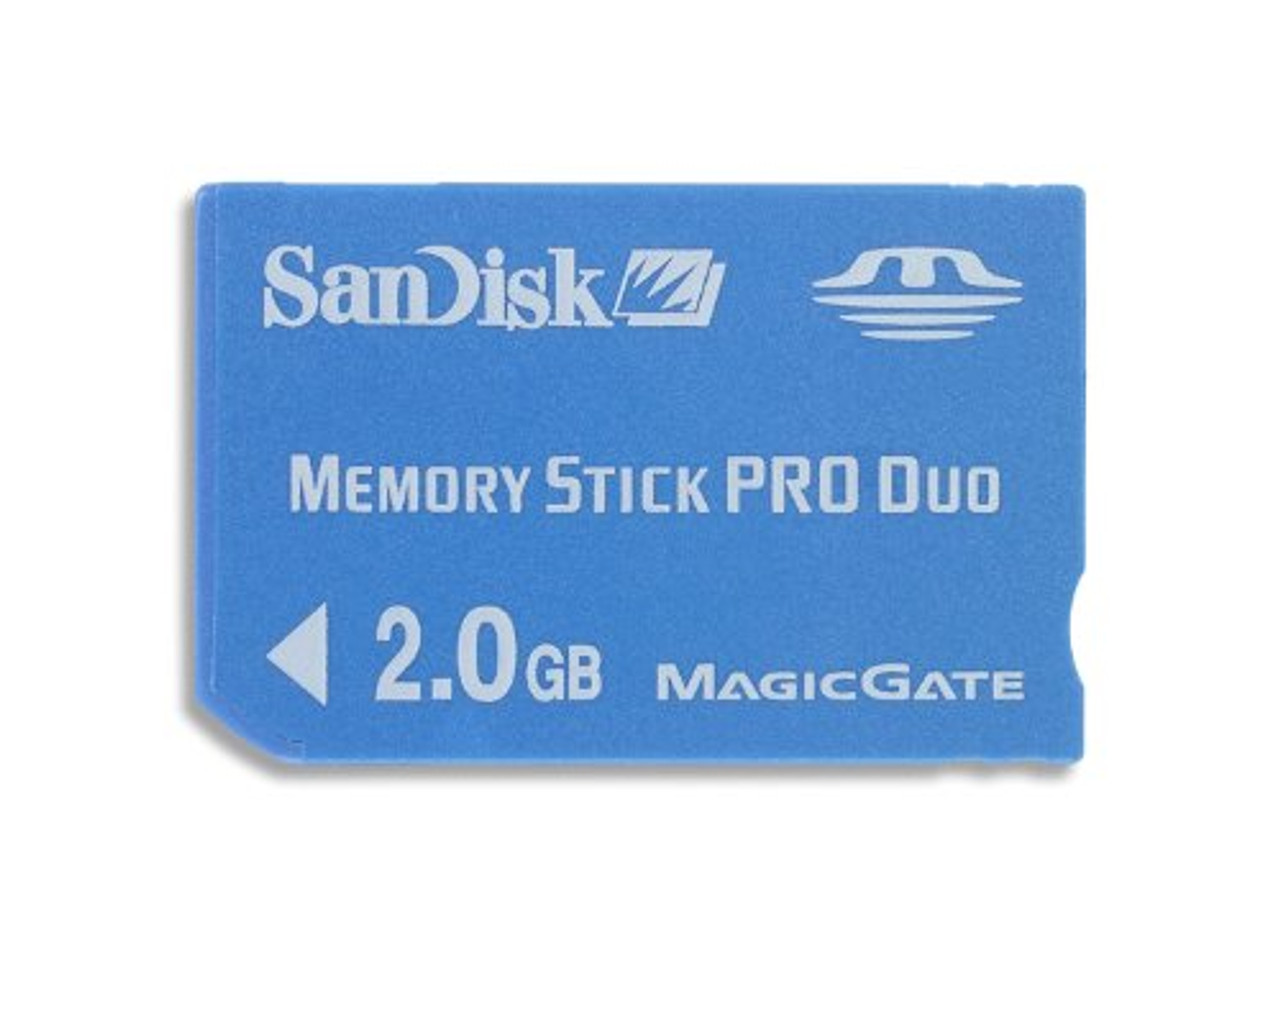 2 GB Memory Stick PRO DUO at